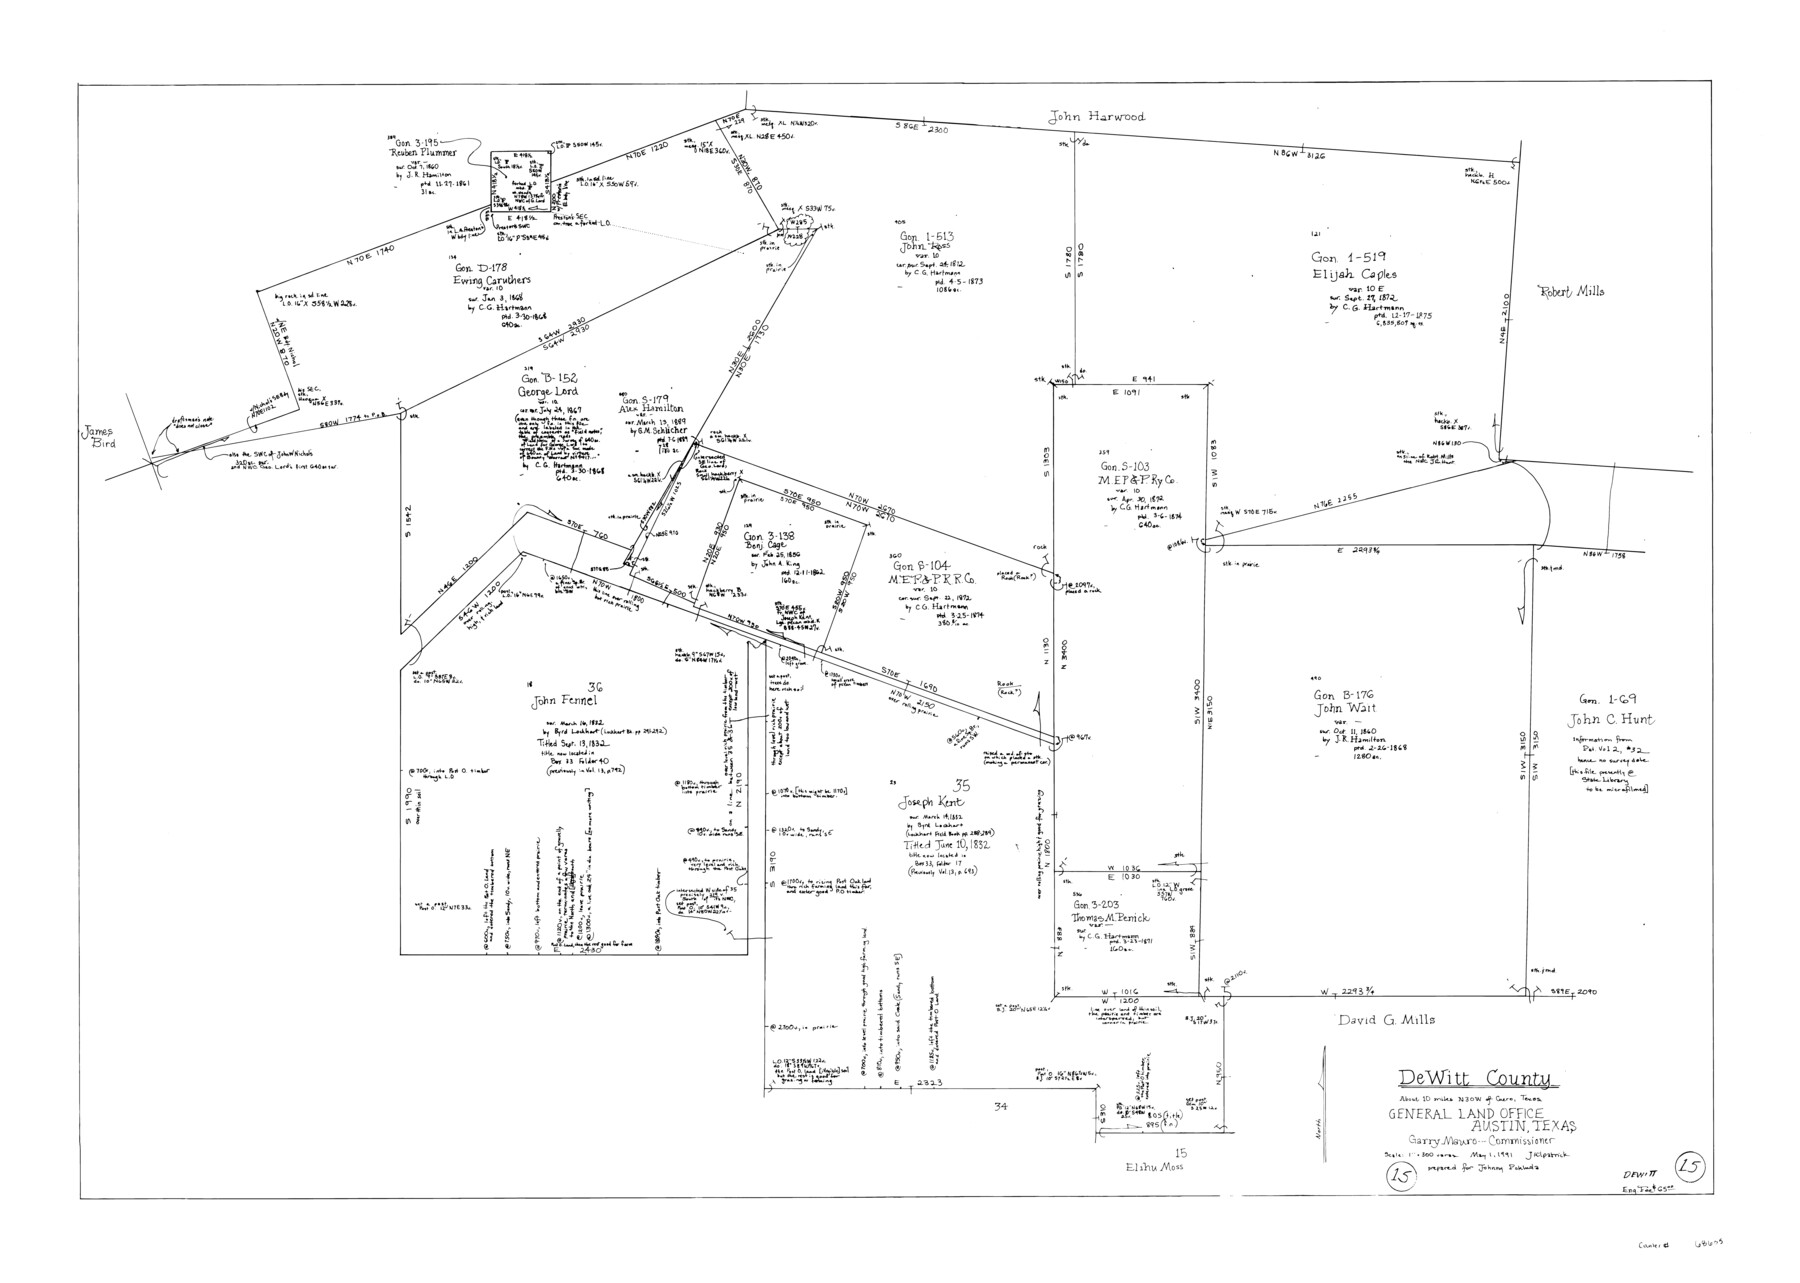 68605, DeWitt County Working Sketch 15, General Map Collection